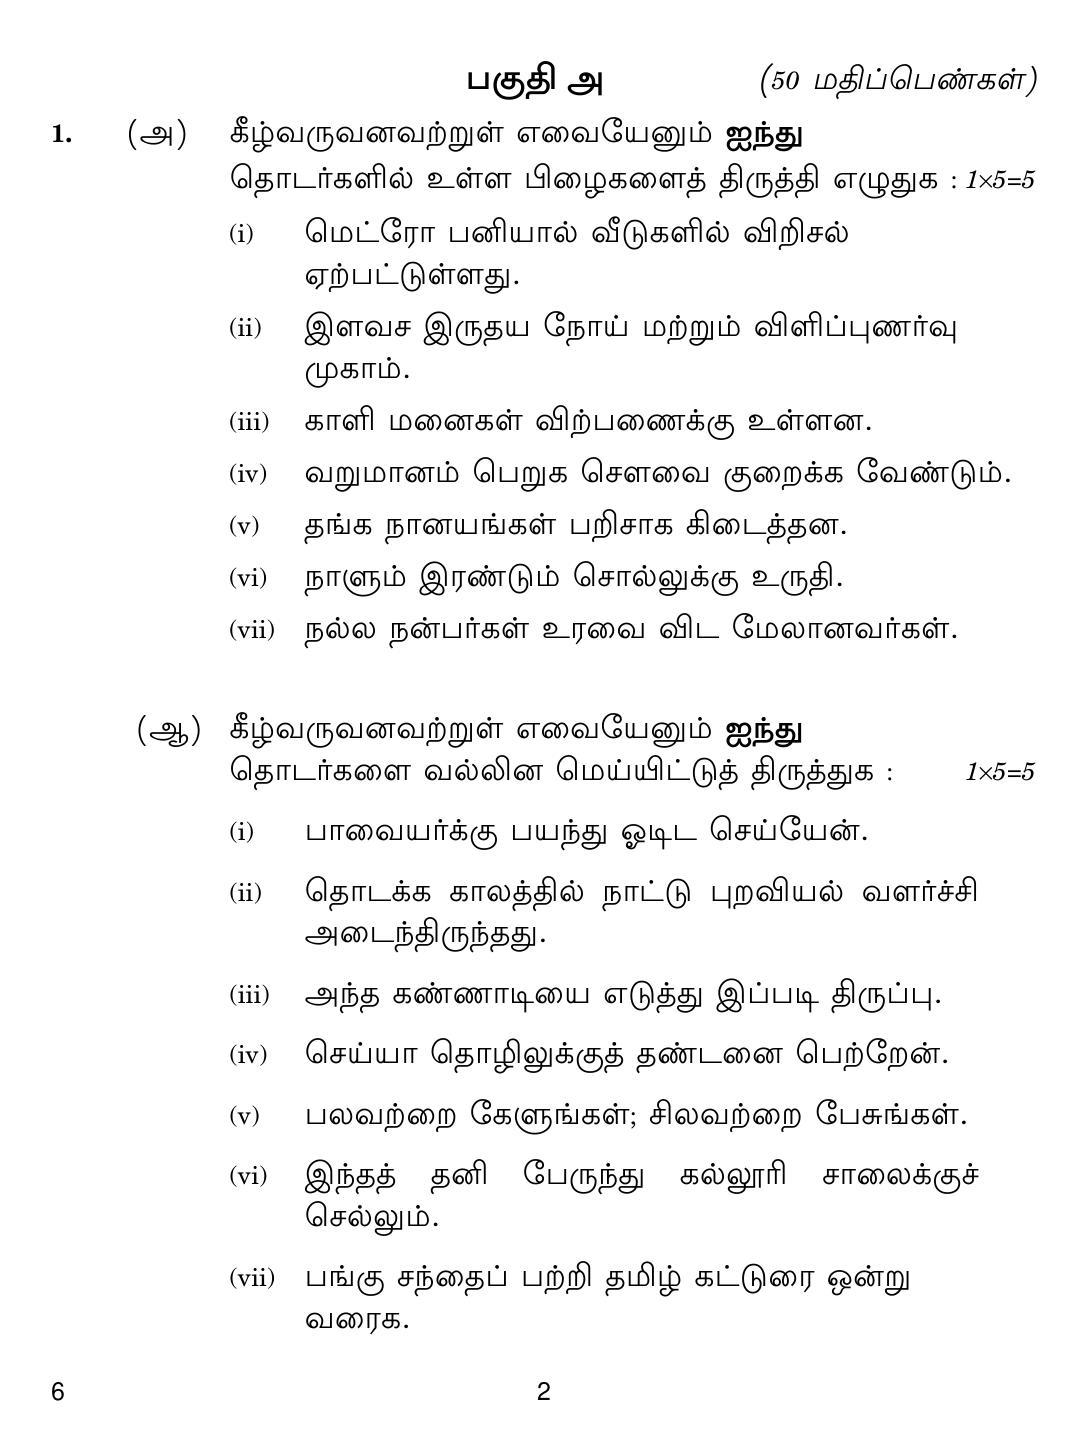 CBSE Class 12 6 Tamil 2018 Question Paper - Page 2